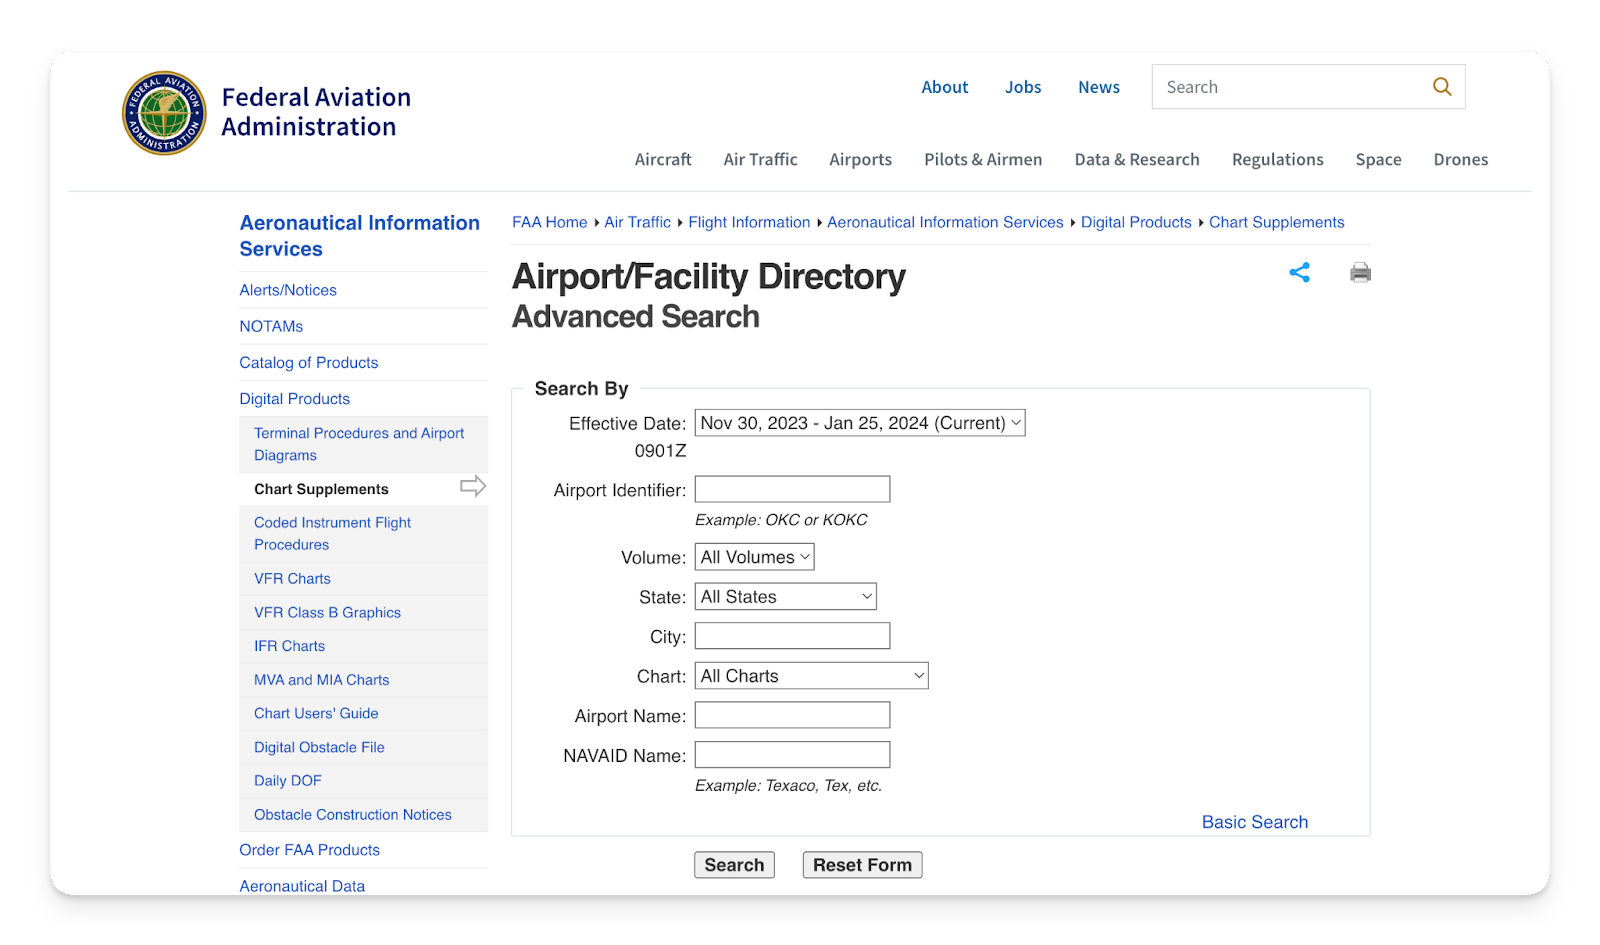 A screenshot of the FAA Airport/Facility Directory page.